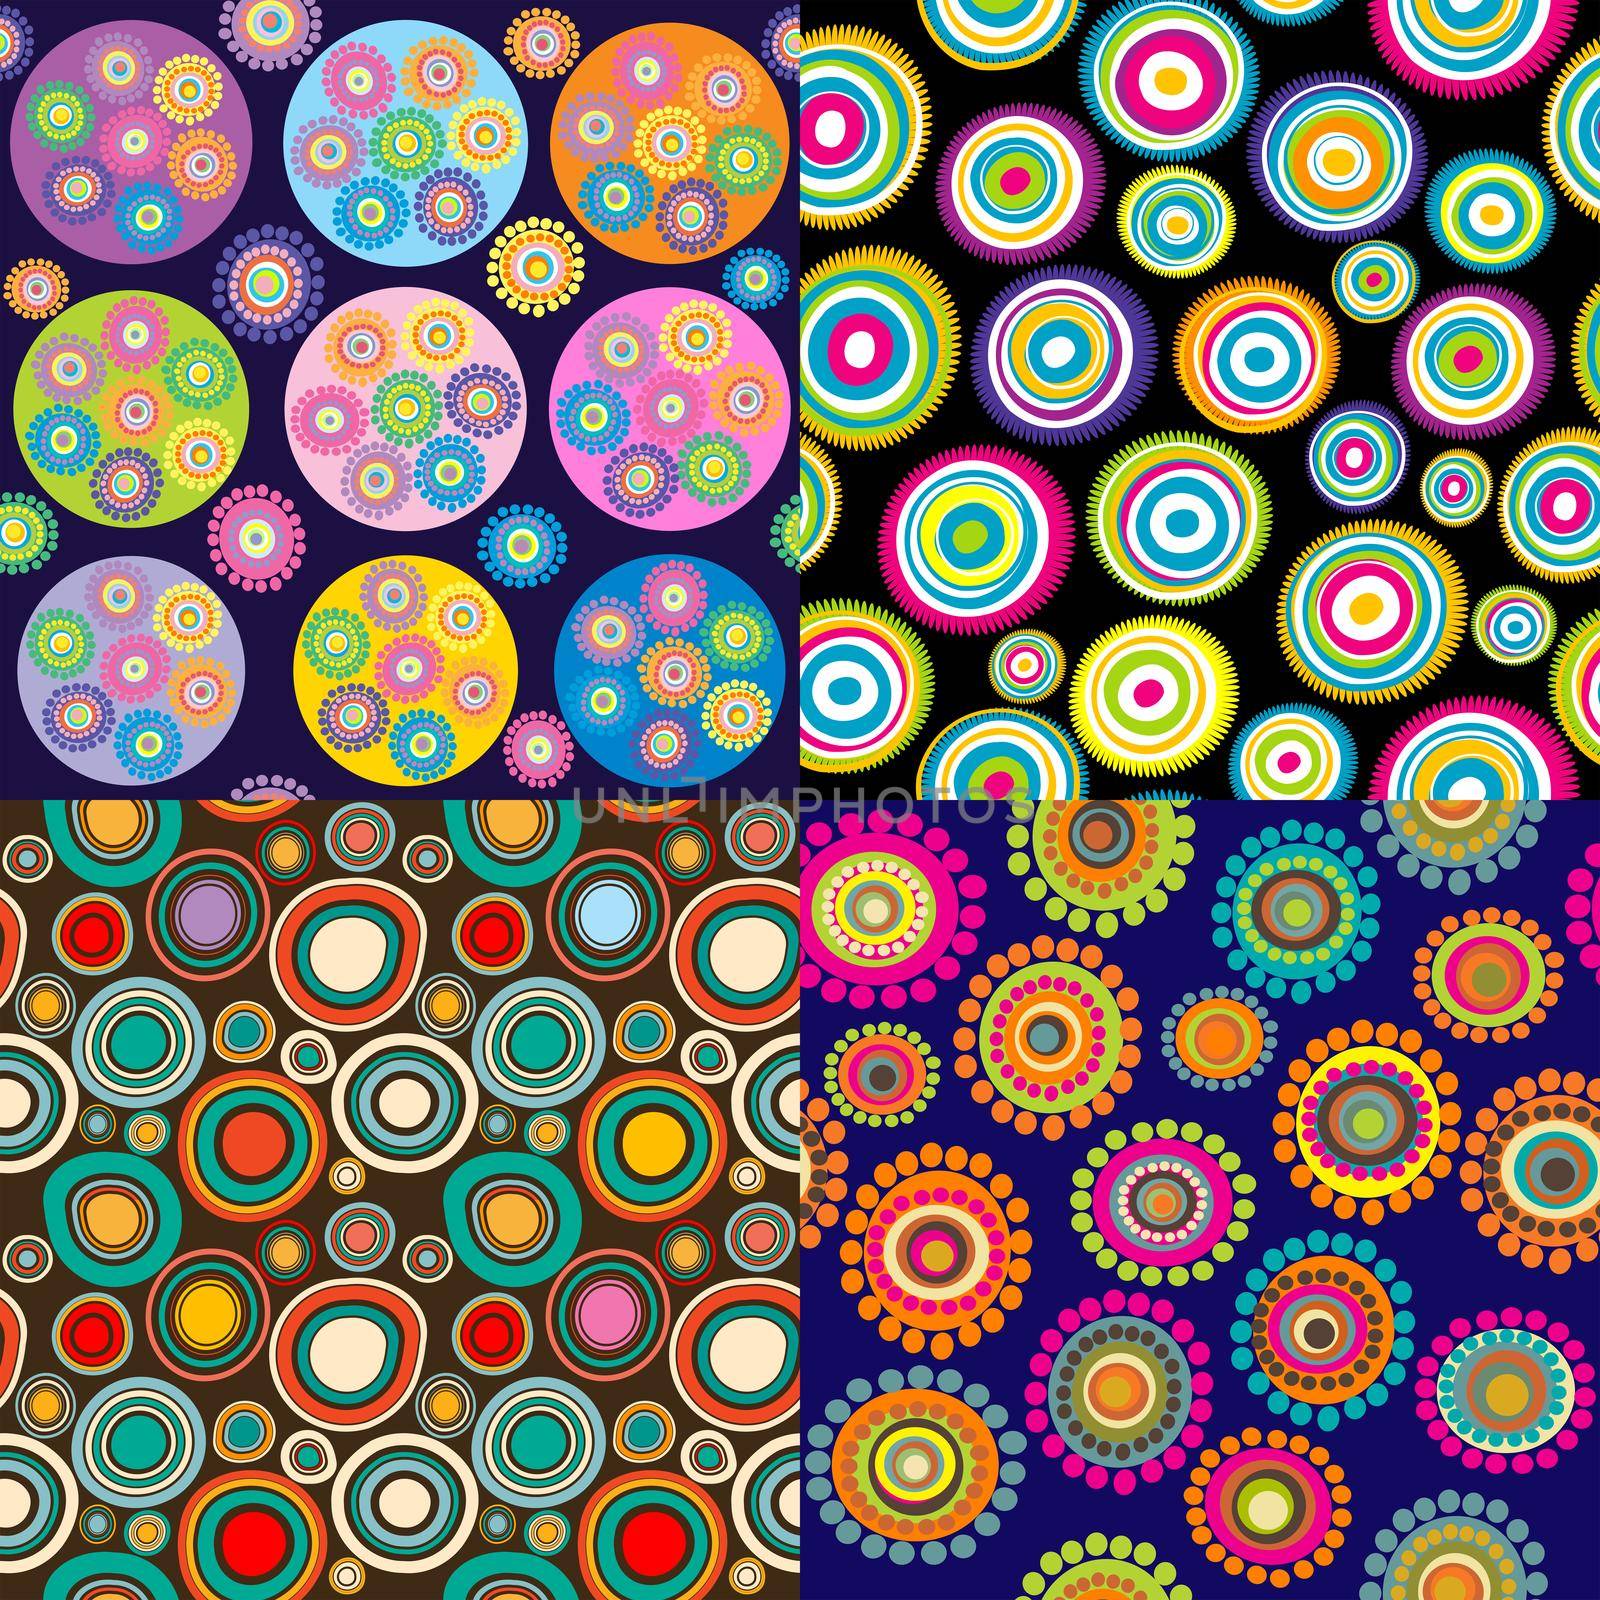 Set of four backgrounds with circular shapes and flowers made of dots by hibrida13